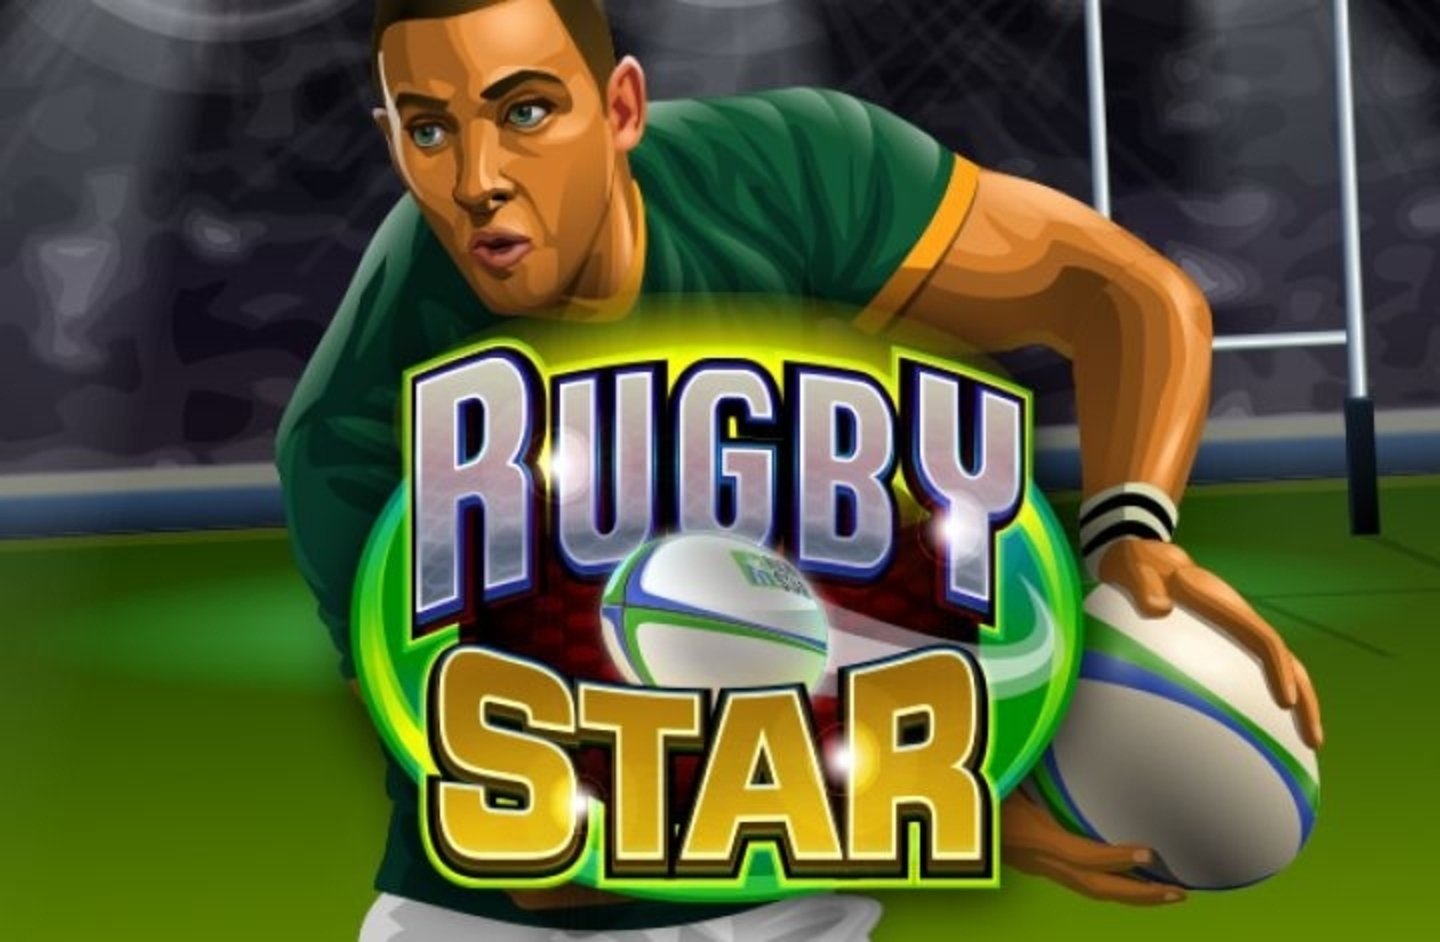 The Rugby Star Online Slot Demo Game by Microgaming